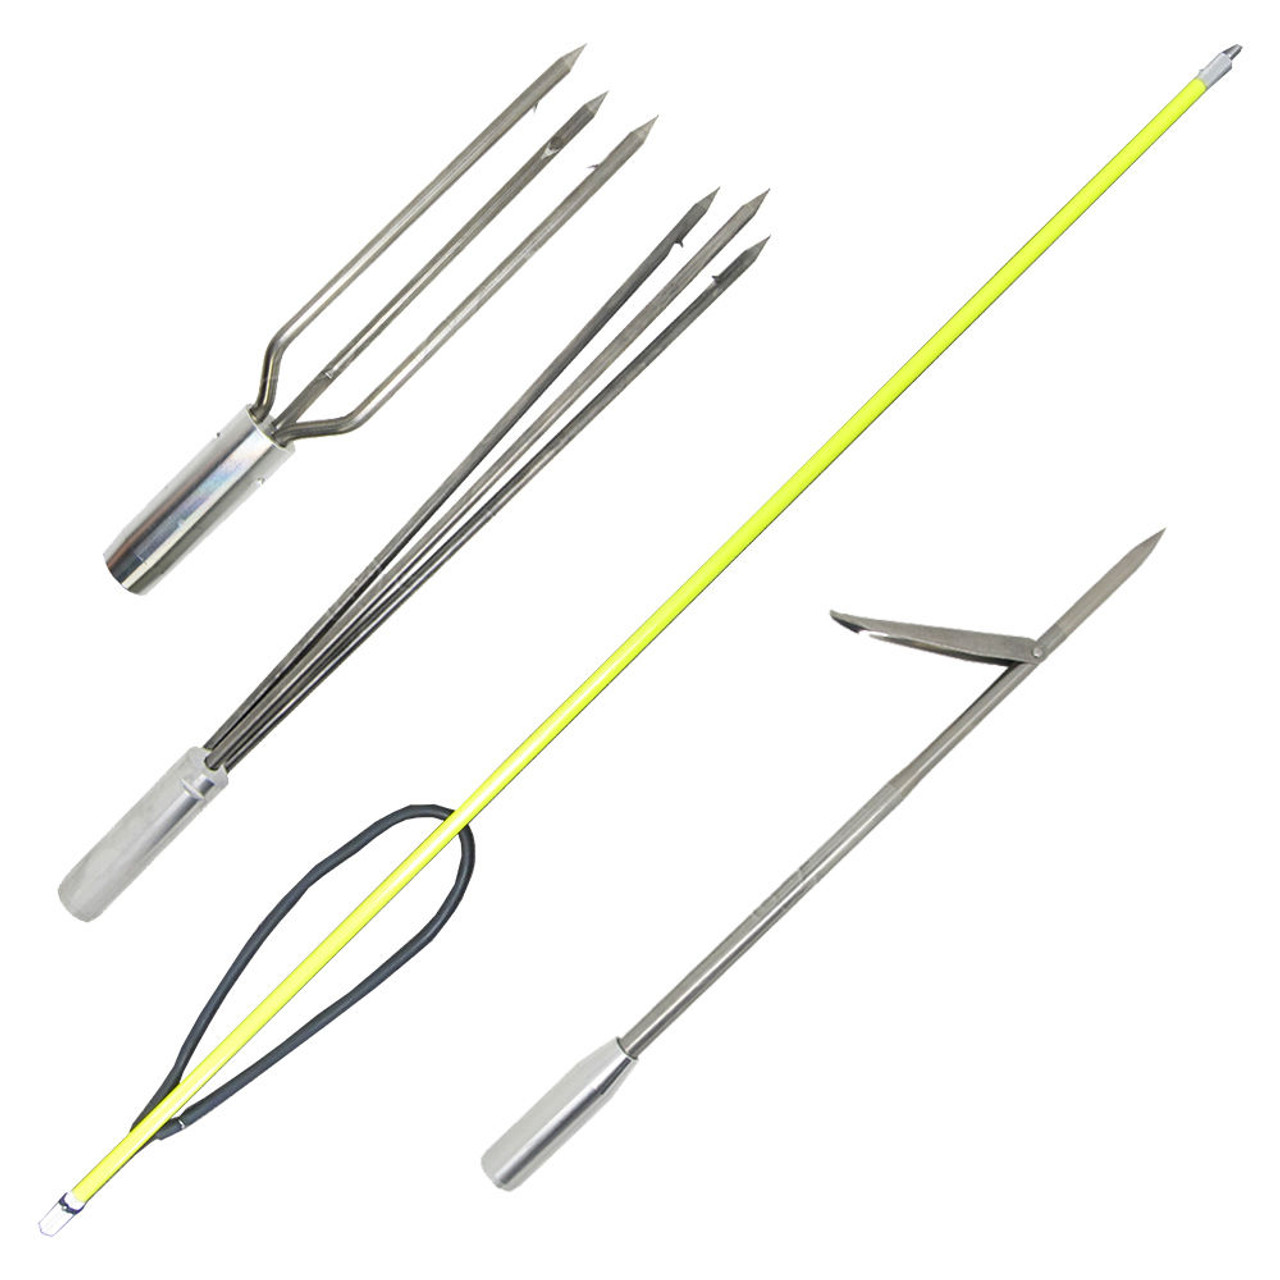 A-jiou Fishing Pole Spear Trigger Glass Fiber 5.5' Travel 3 Pieces Hawaiian  Sling with 2 Tips and Bag : Buy Online at Best Price in KSA - Souq is now  : Sporting Goods